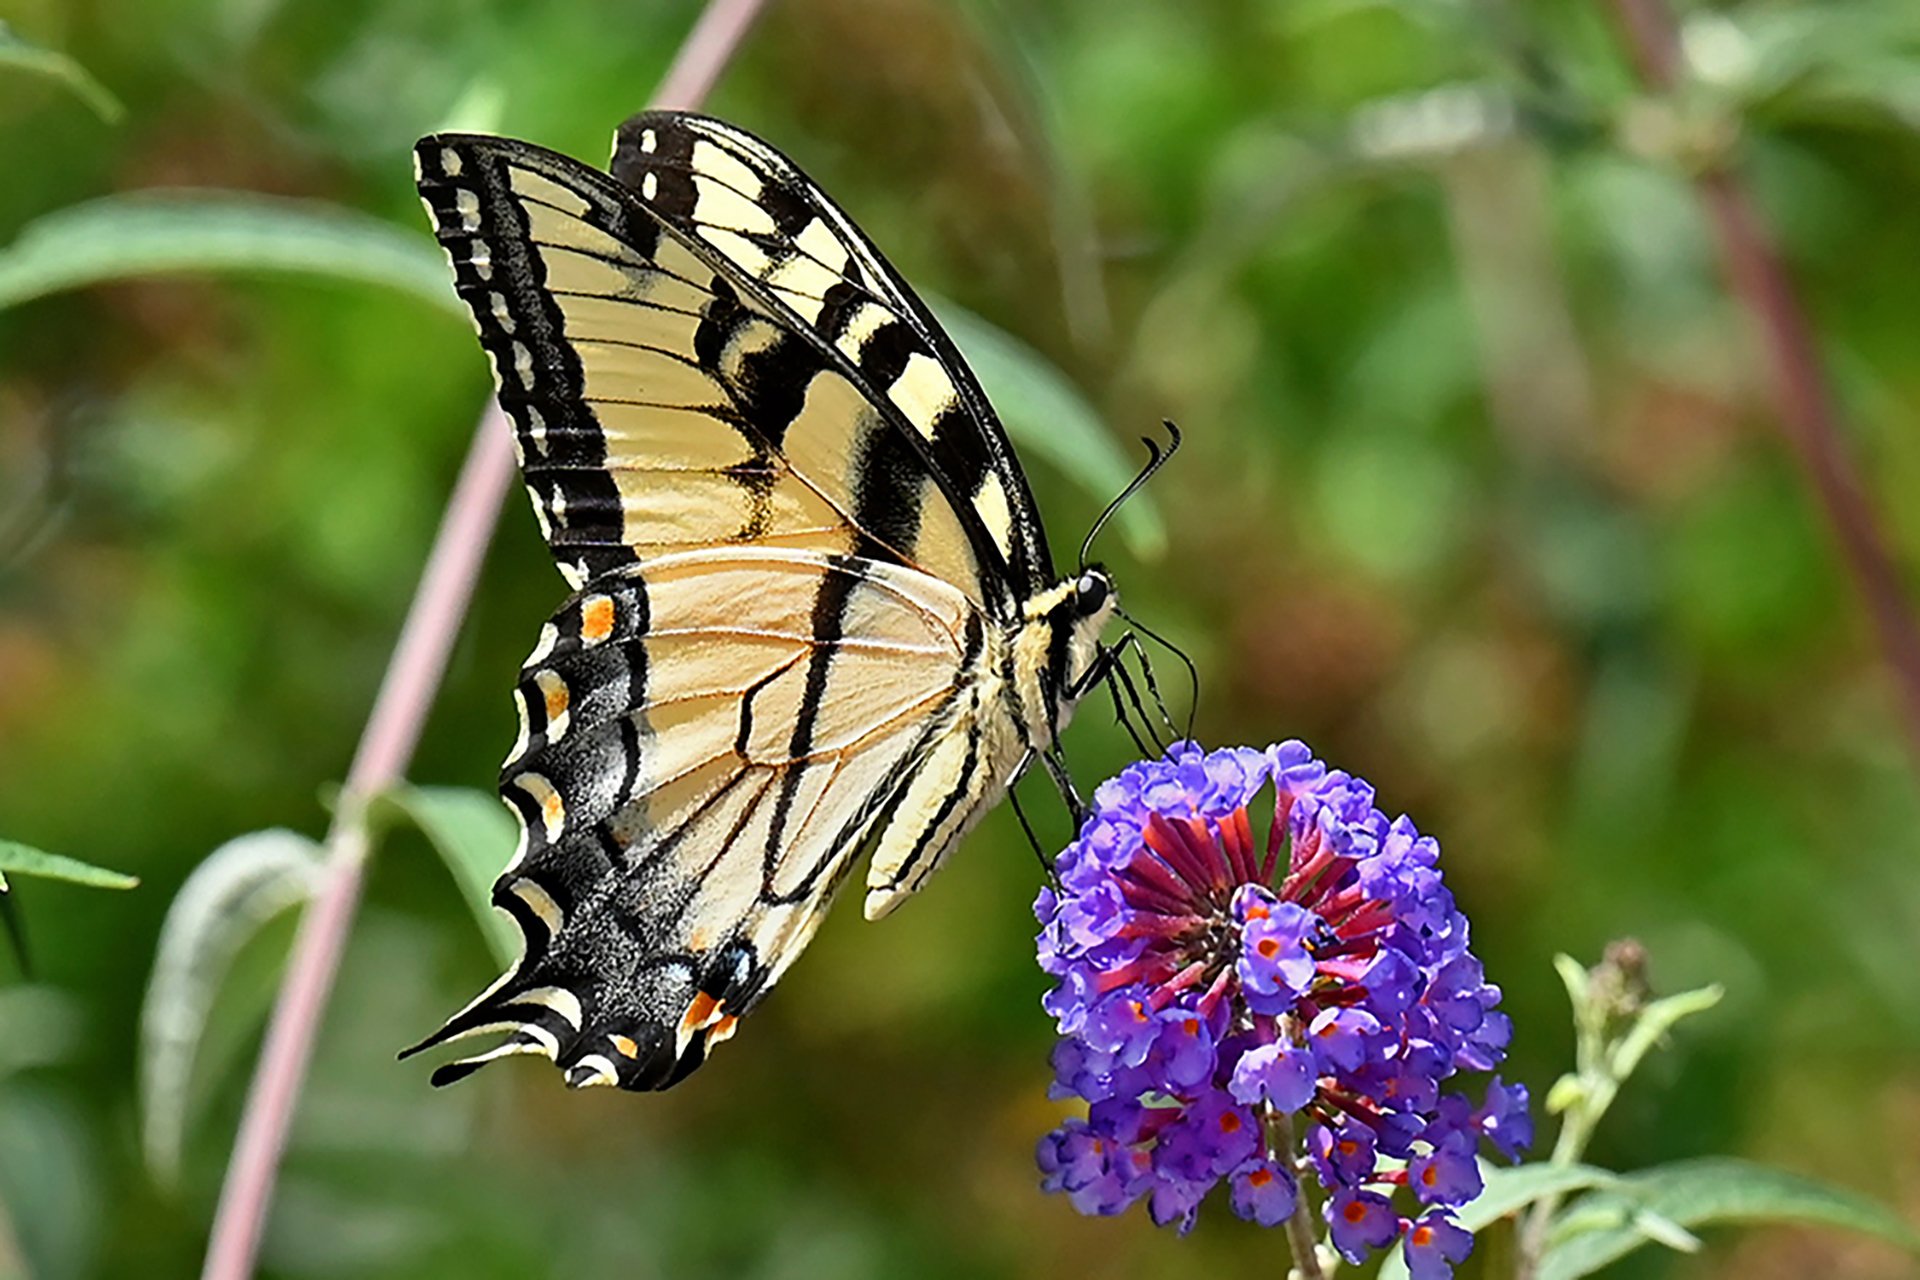 Butterfly perched on a purple flower